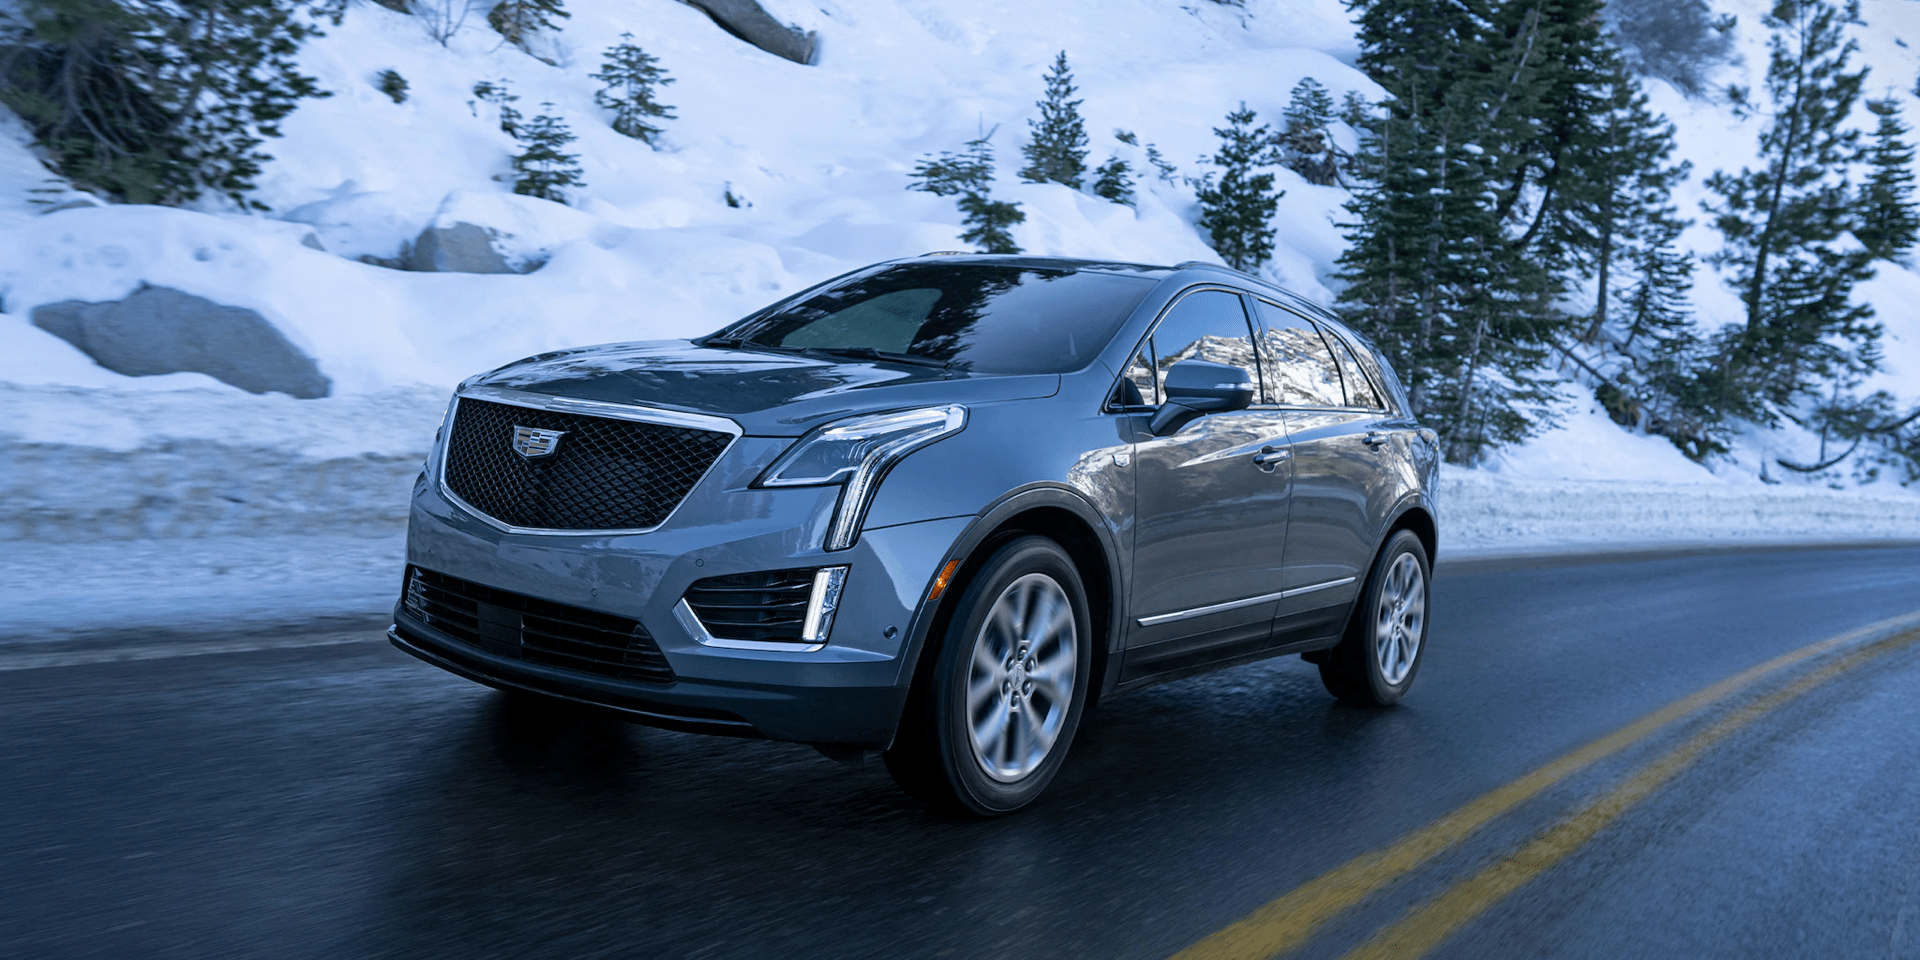 XT5 drives on paved, shoveled snowy highway